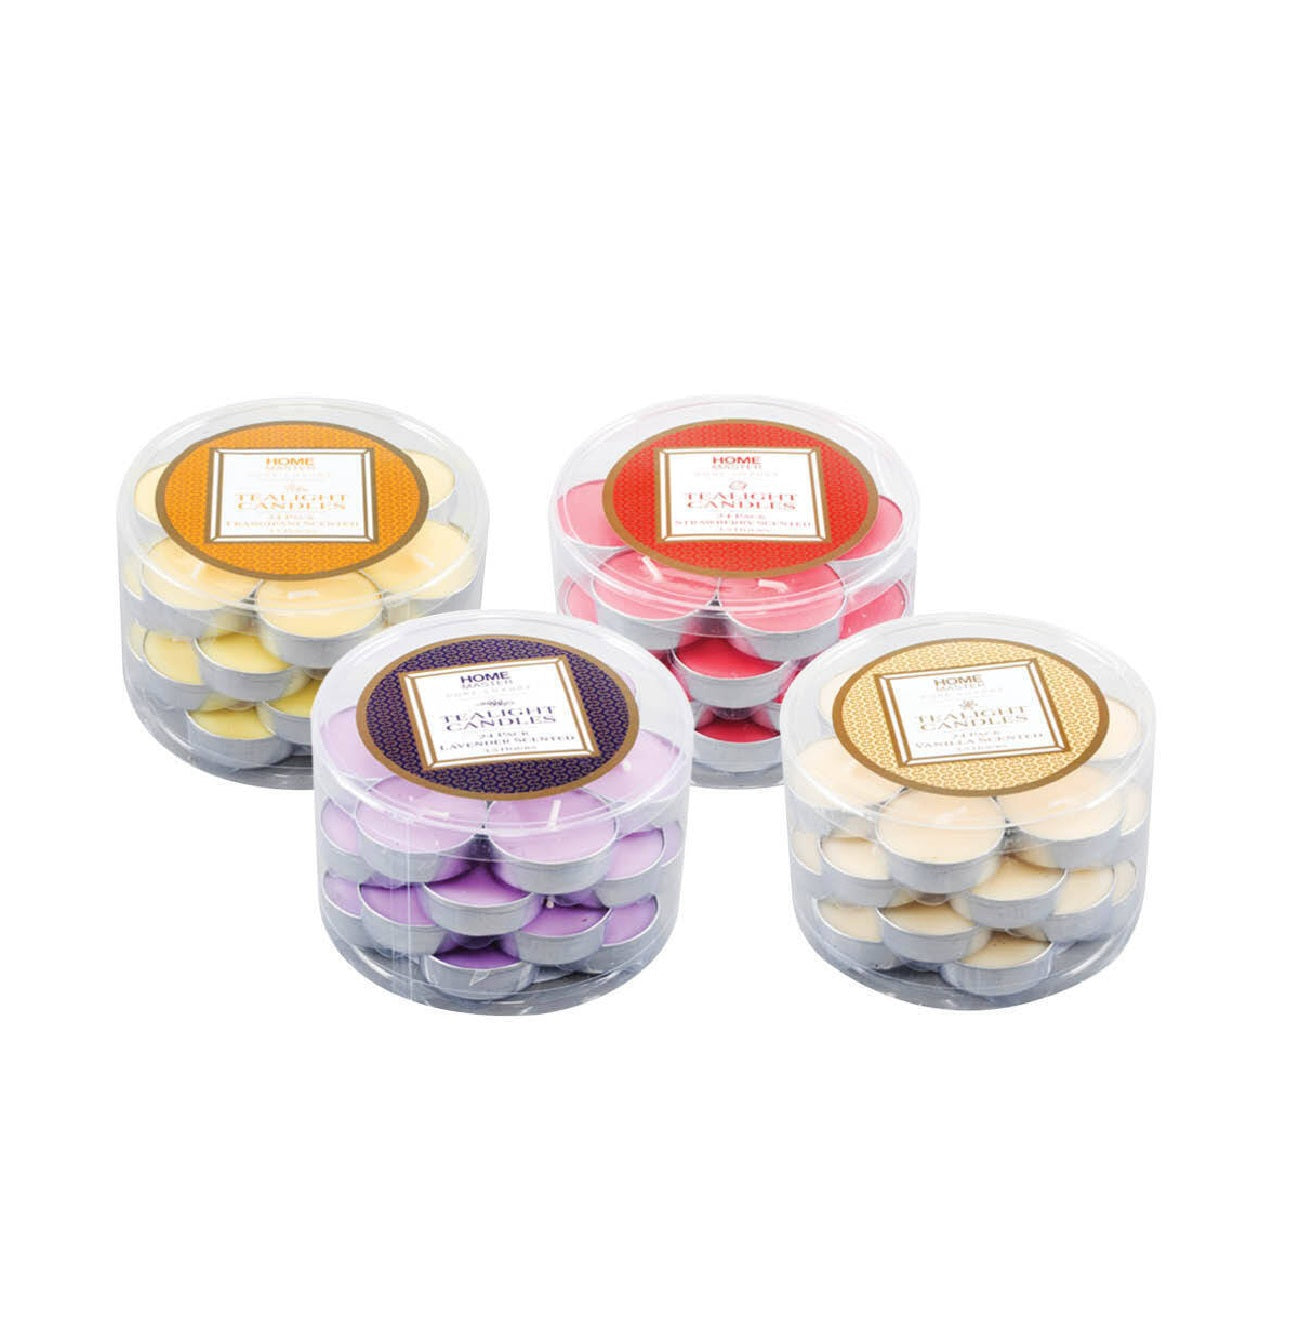 24pce Tealight Candles - Lavender Scented